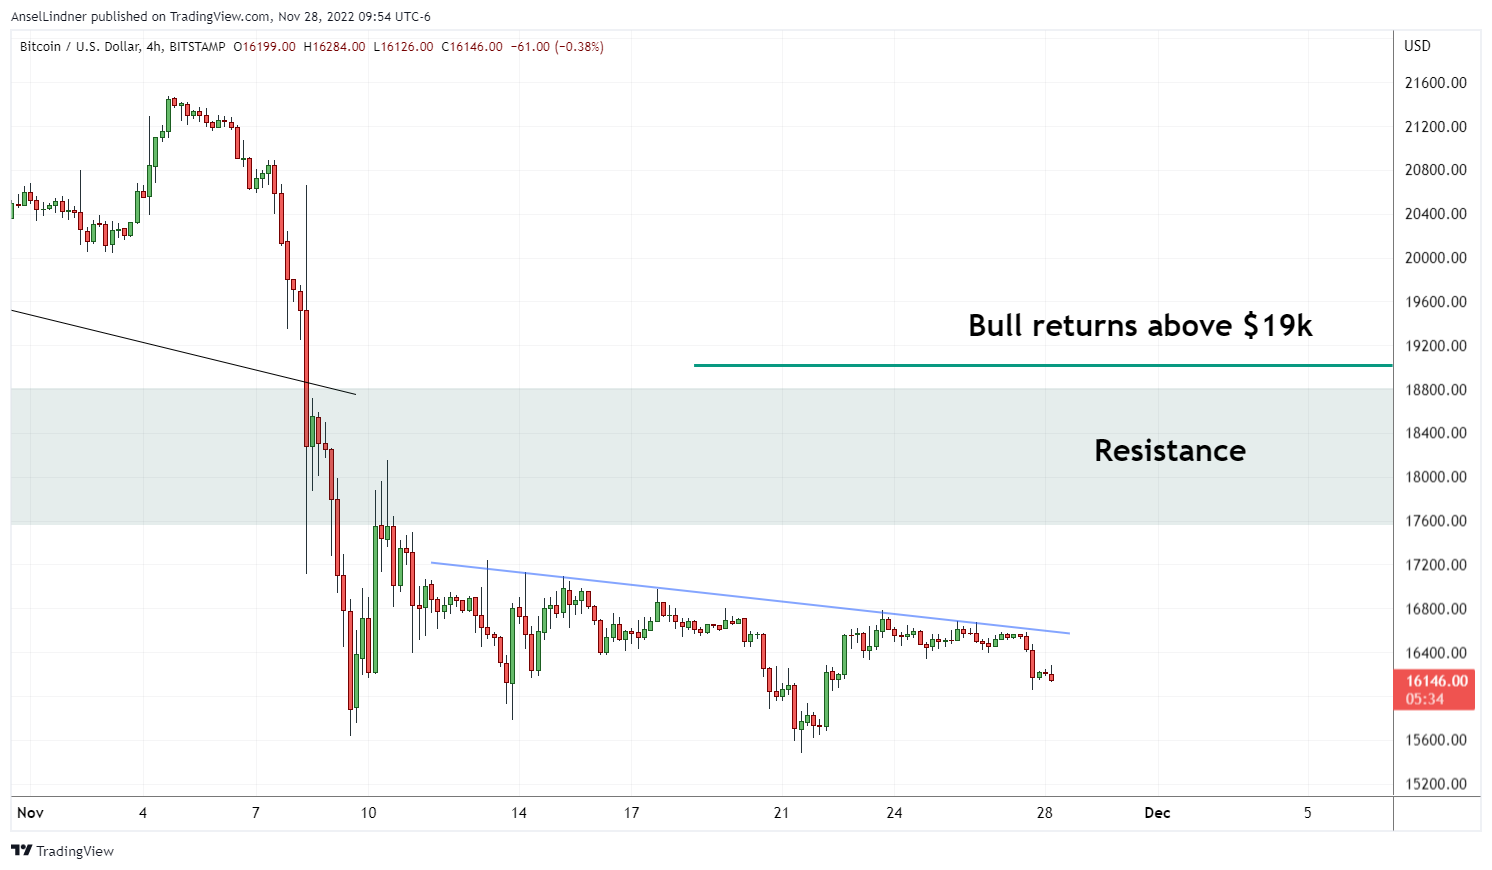 Bitcoin 4-hour chart with resistance